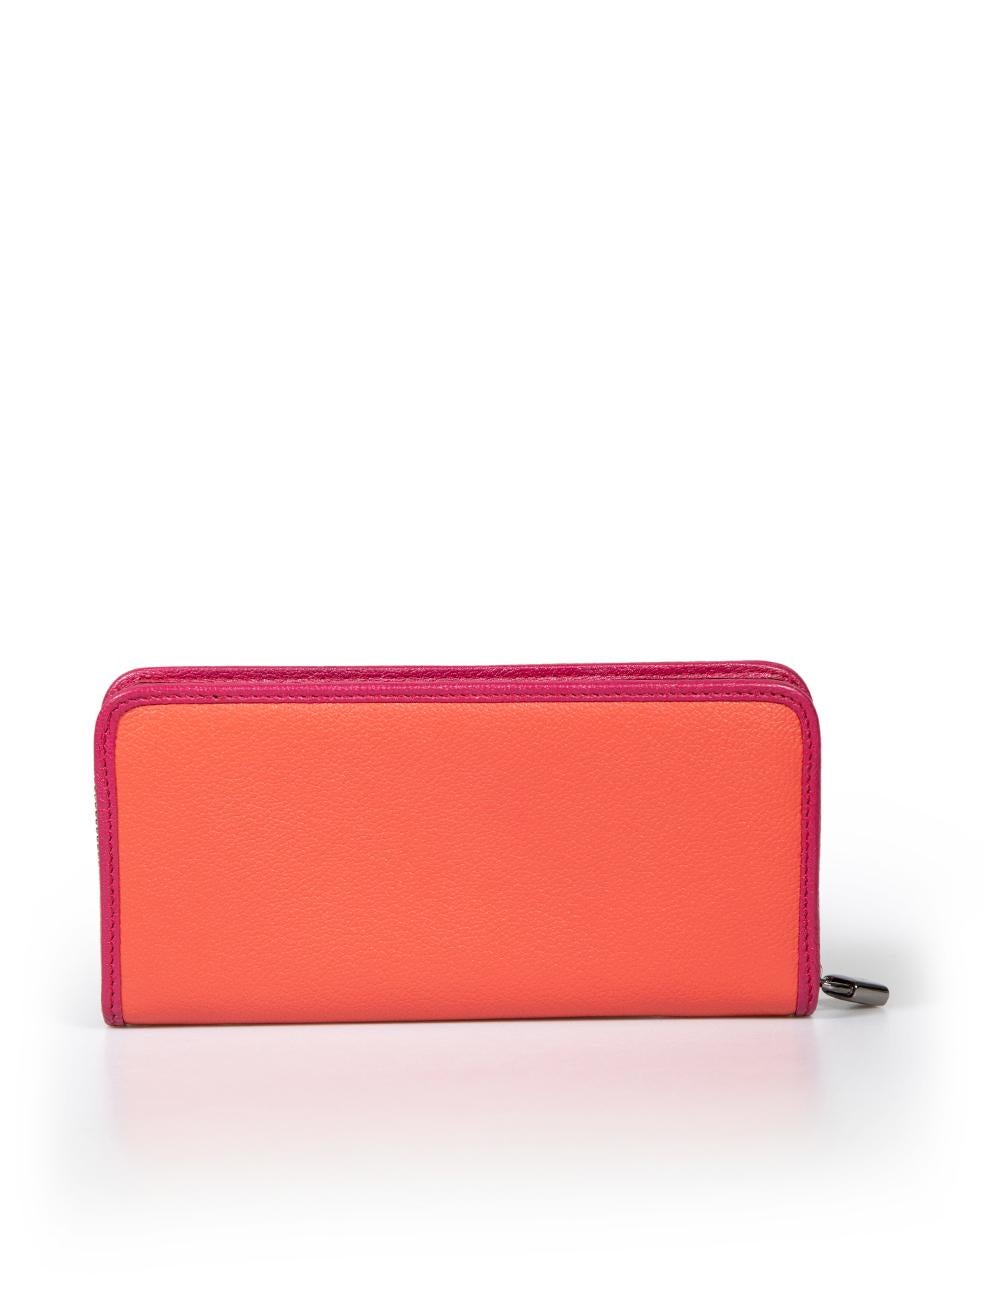 Loewe Red Leather Amazona Zip Around Long Wallet In New Condition For Sale In London, GB